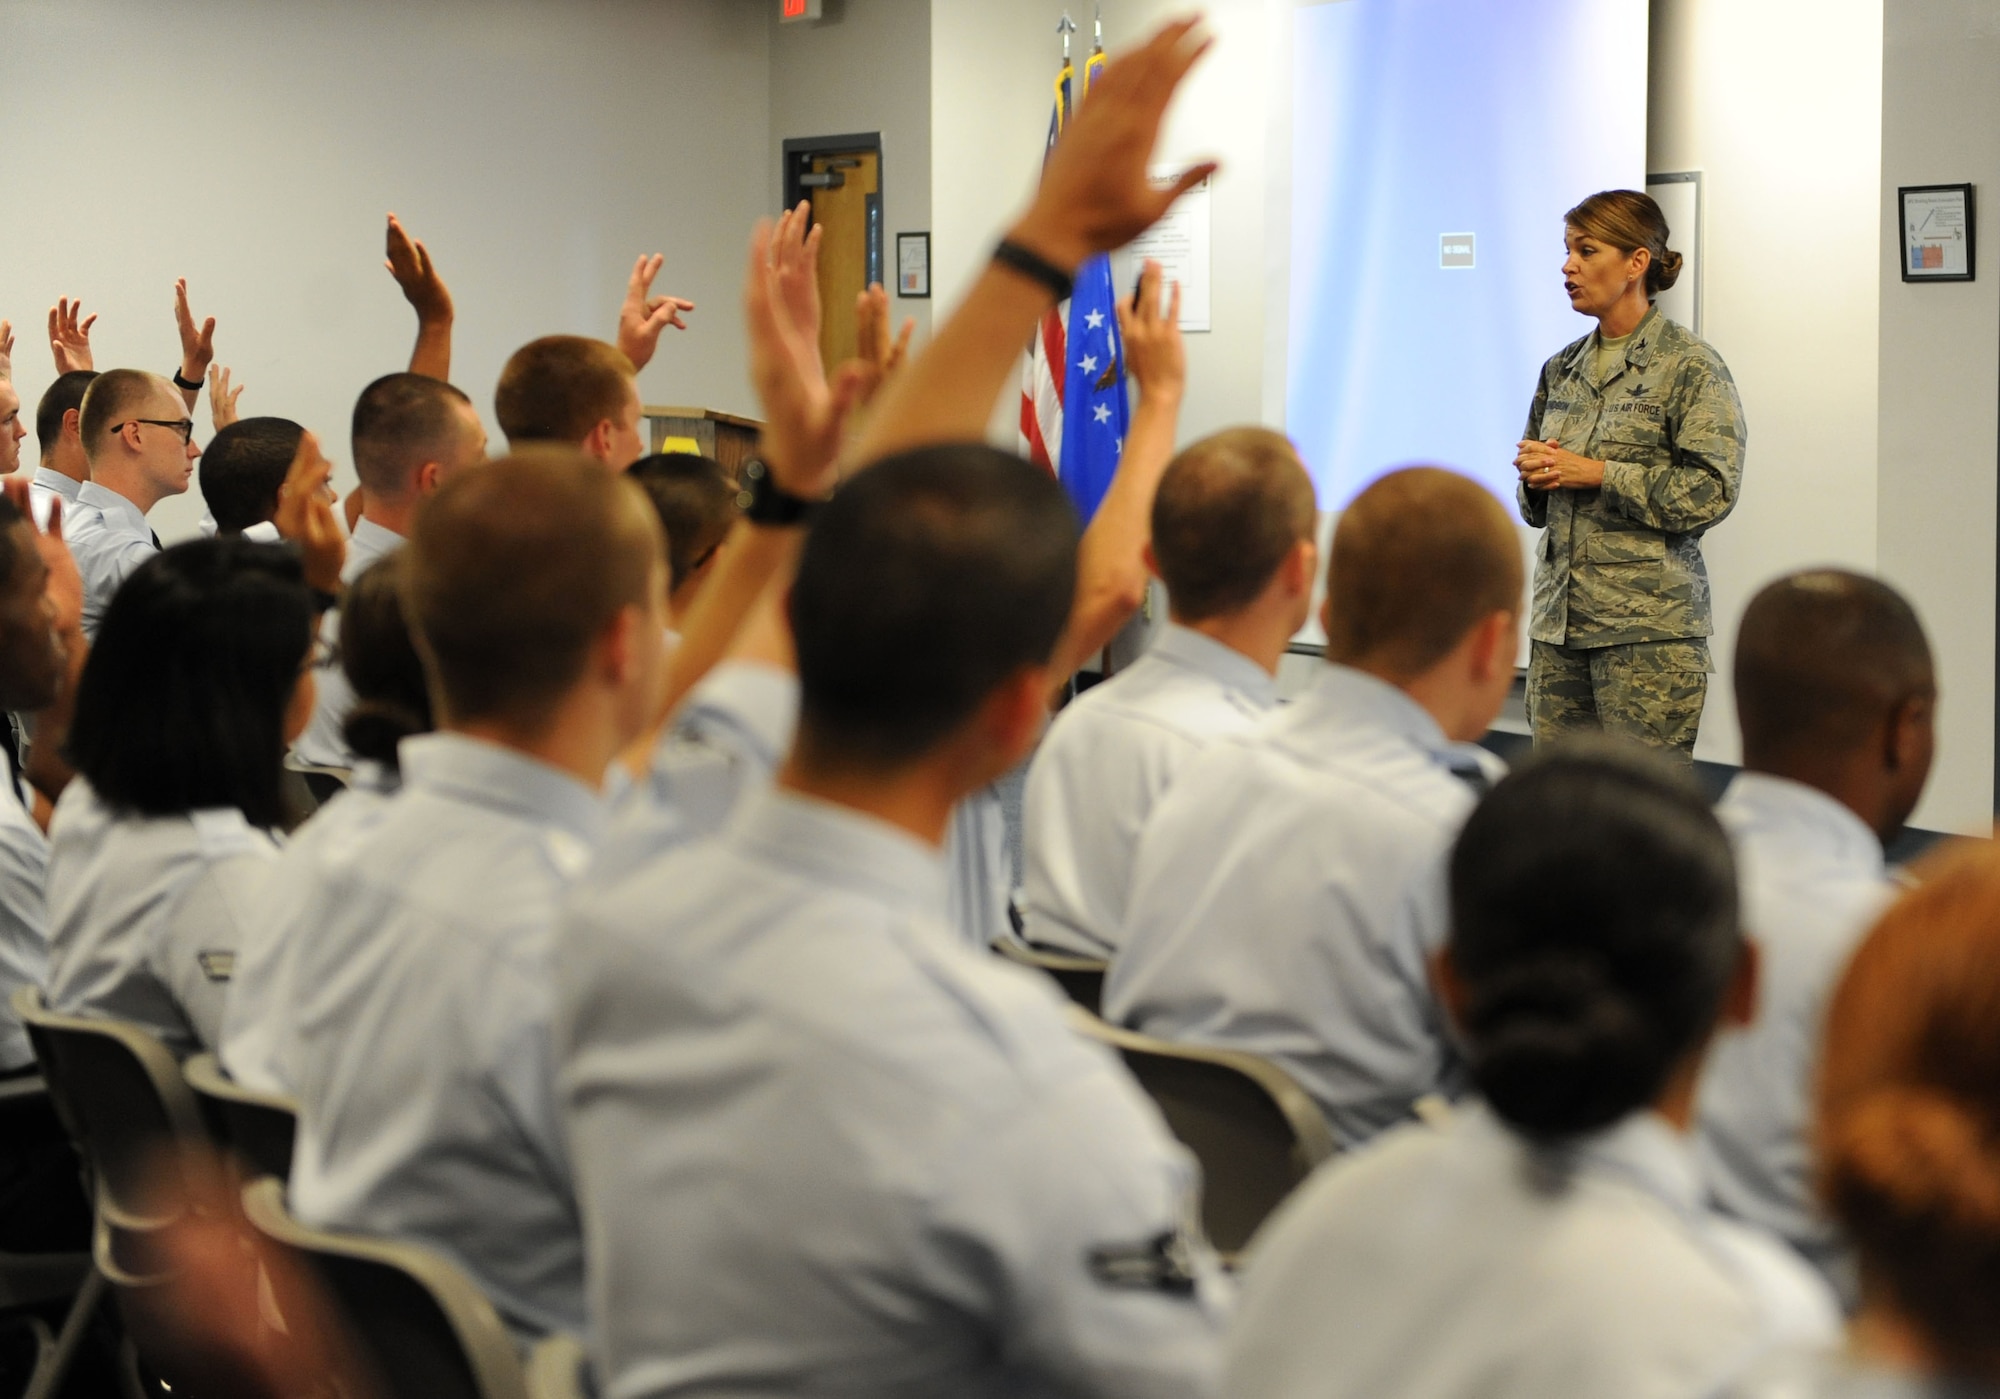 Col. Michele Edmondson, 81st Training Wing commander, welcomes non-prior service Airmen to Keesler during their in-processing at the Levitow Training Support Facility July 2, 2016, on Keesler Air Force Base, Miss. Base leadership welcomes the new Airmen every Tuesday upon their arrival from enlisted basic military training at Lackland Air Force Base, Texas. (U.S. Air Force photo by Kemberly Groue/Released)